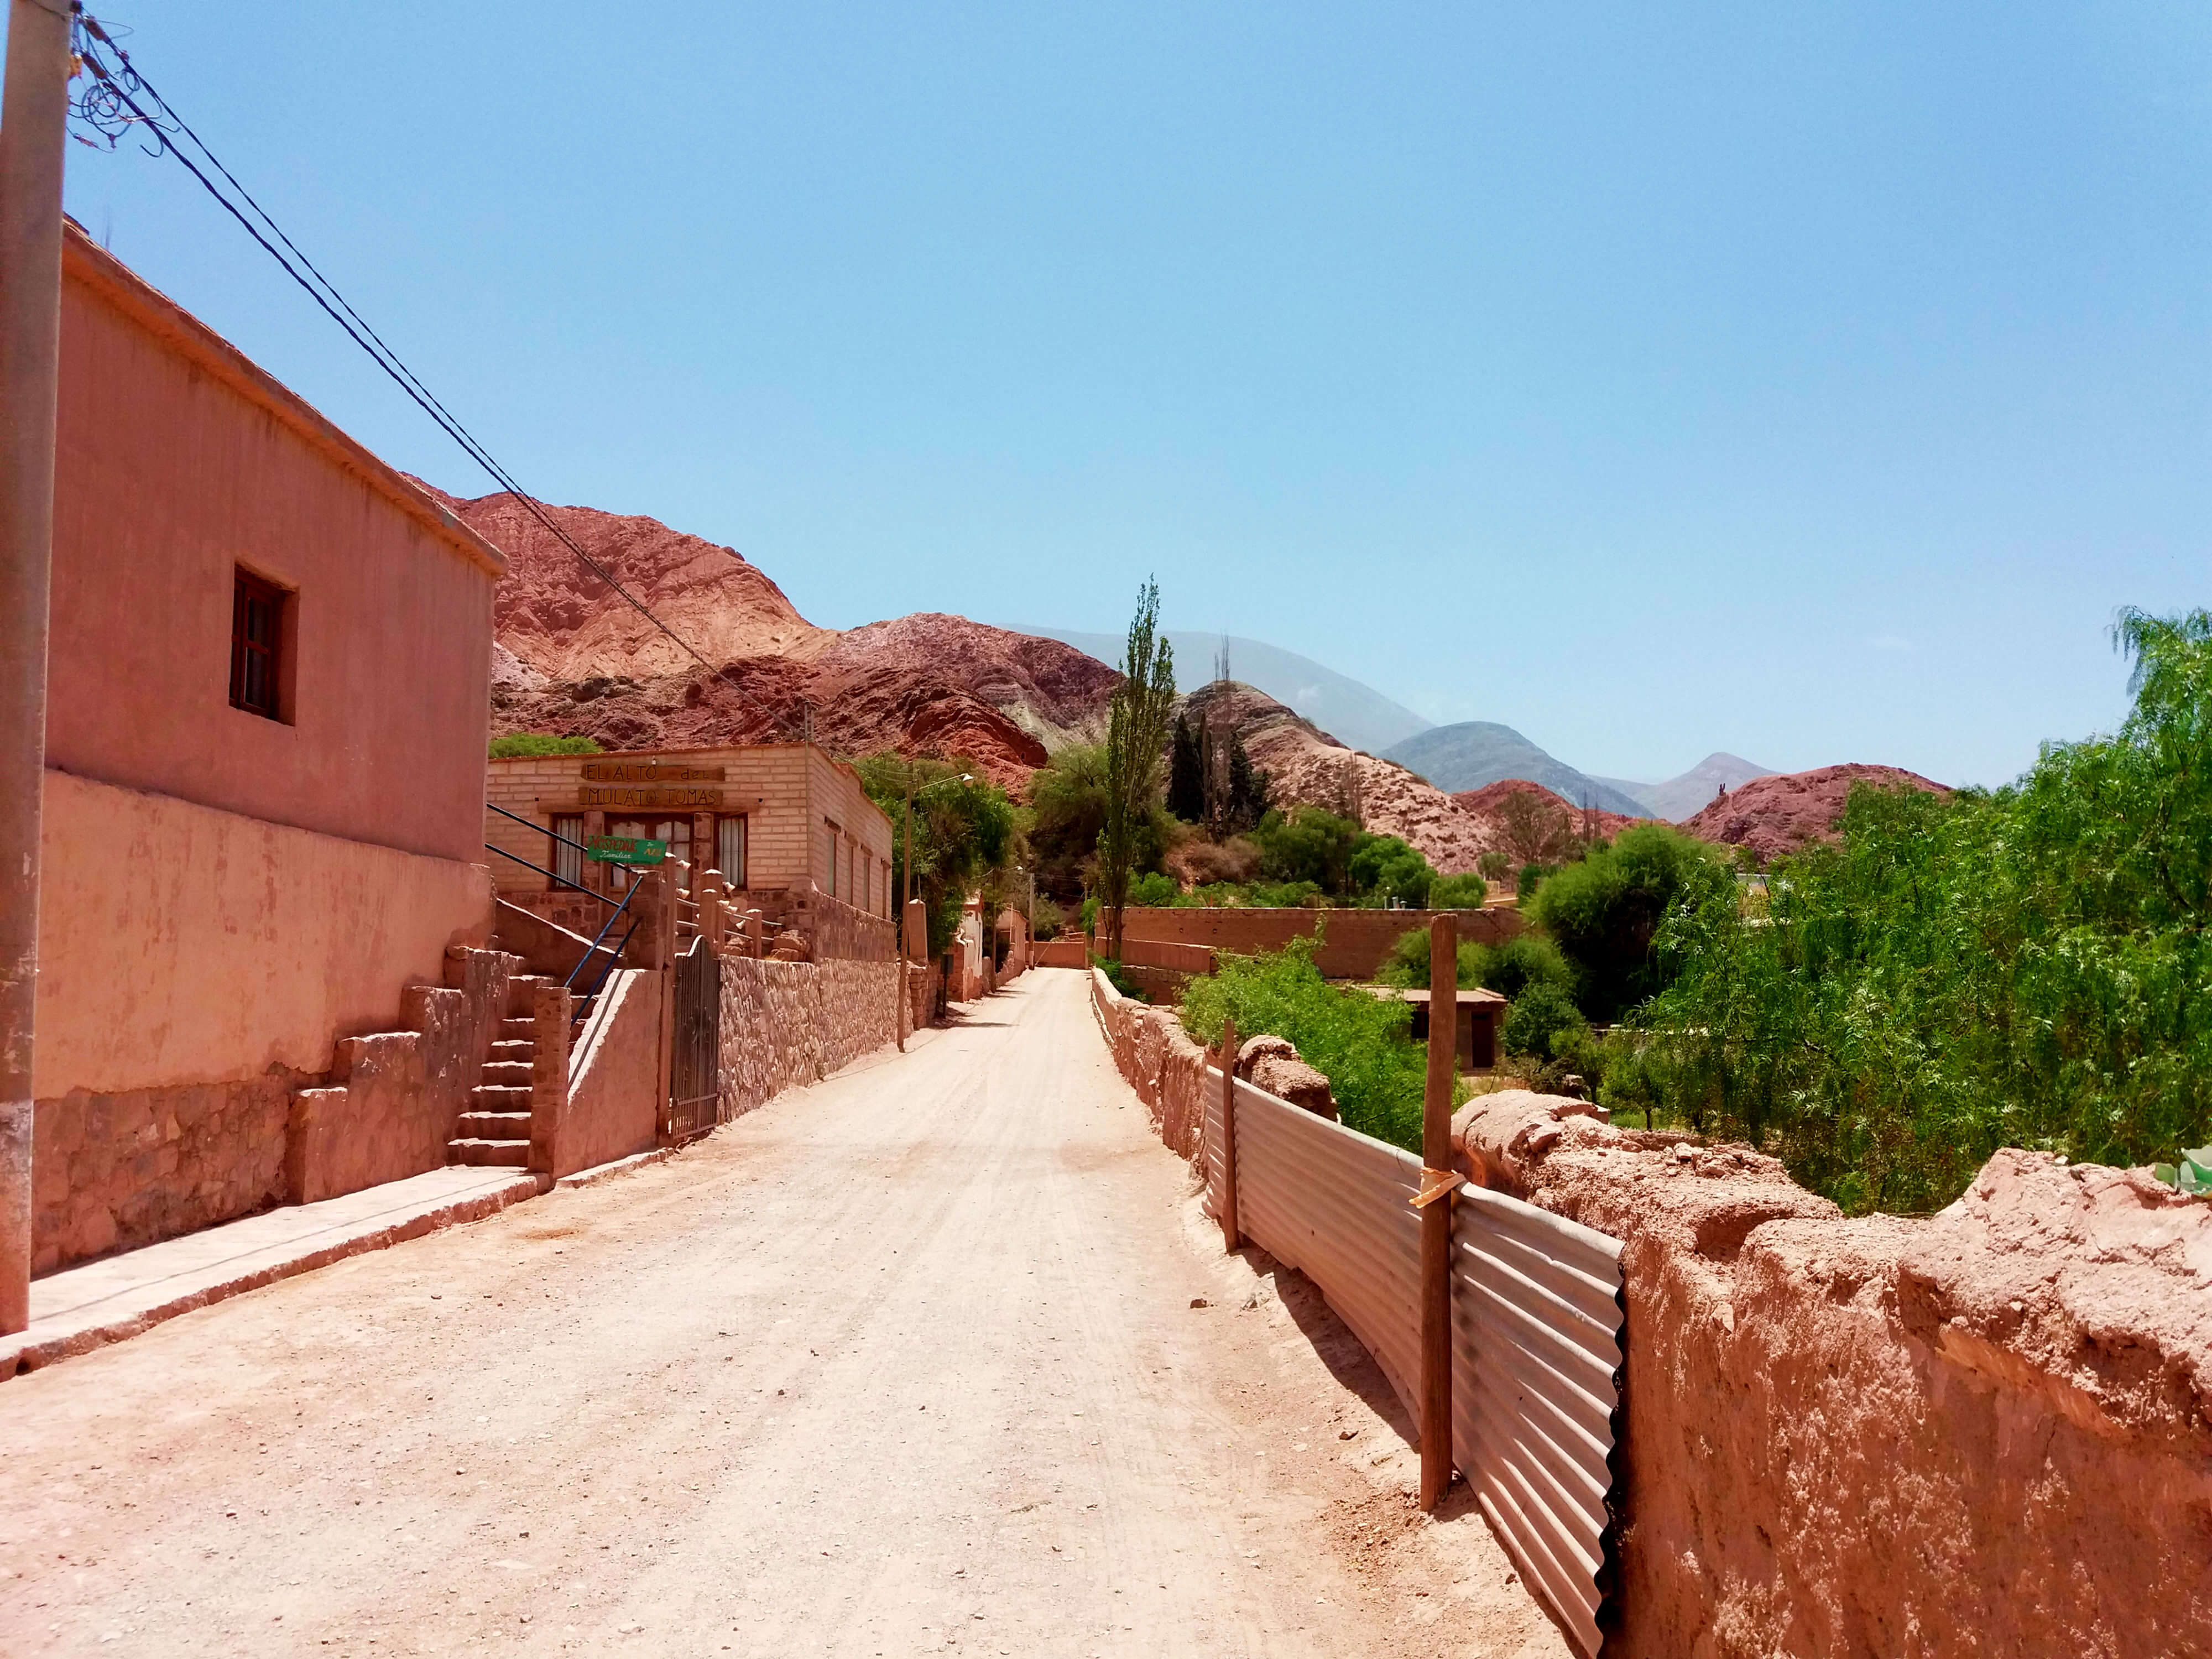 Travel inspiration: Jujuy, Rainbow mountains and Turquoise waters